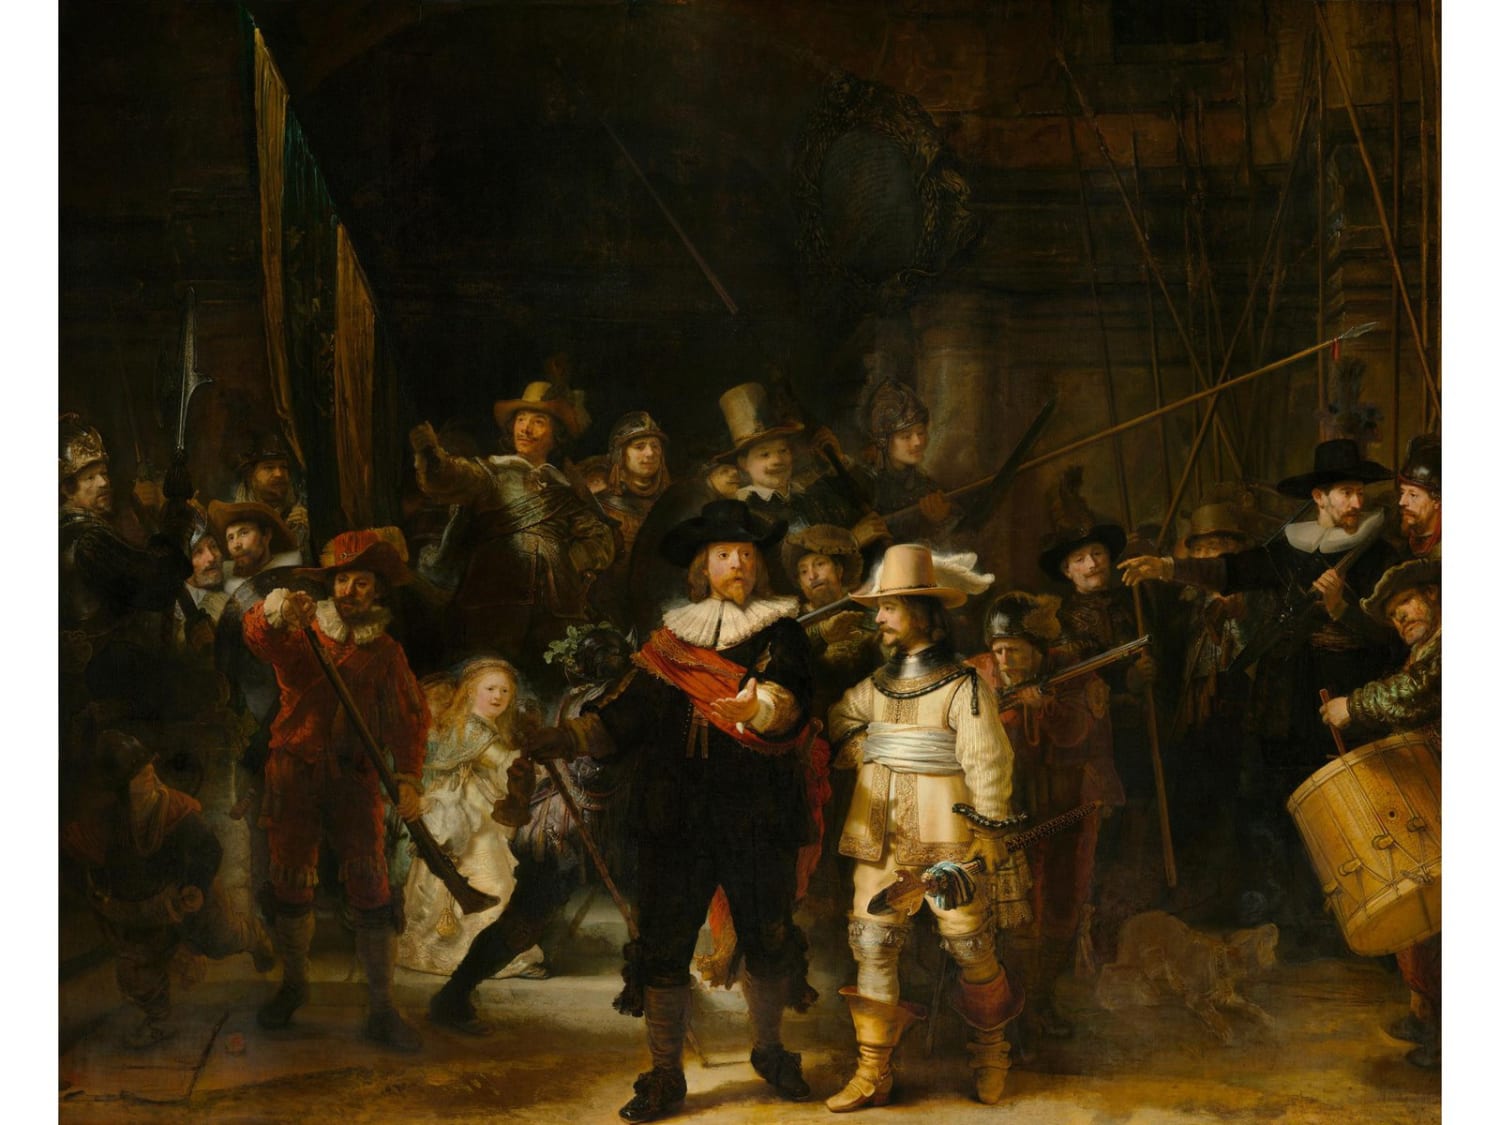 Explore a Hyper-Resolution Rendering of Rembrandt's 'The Night Watch' Online